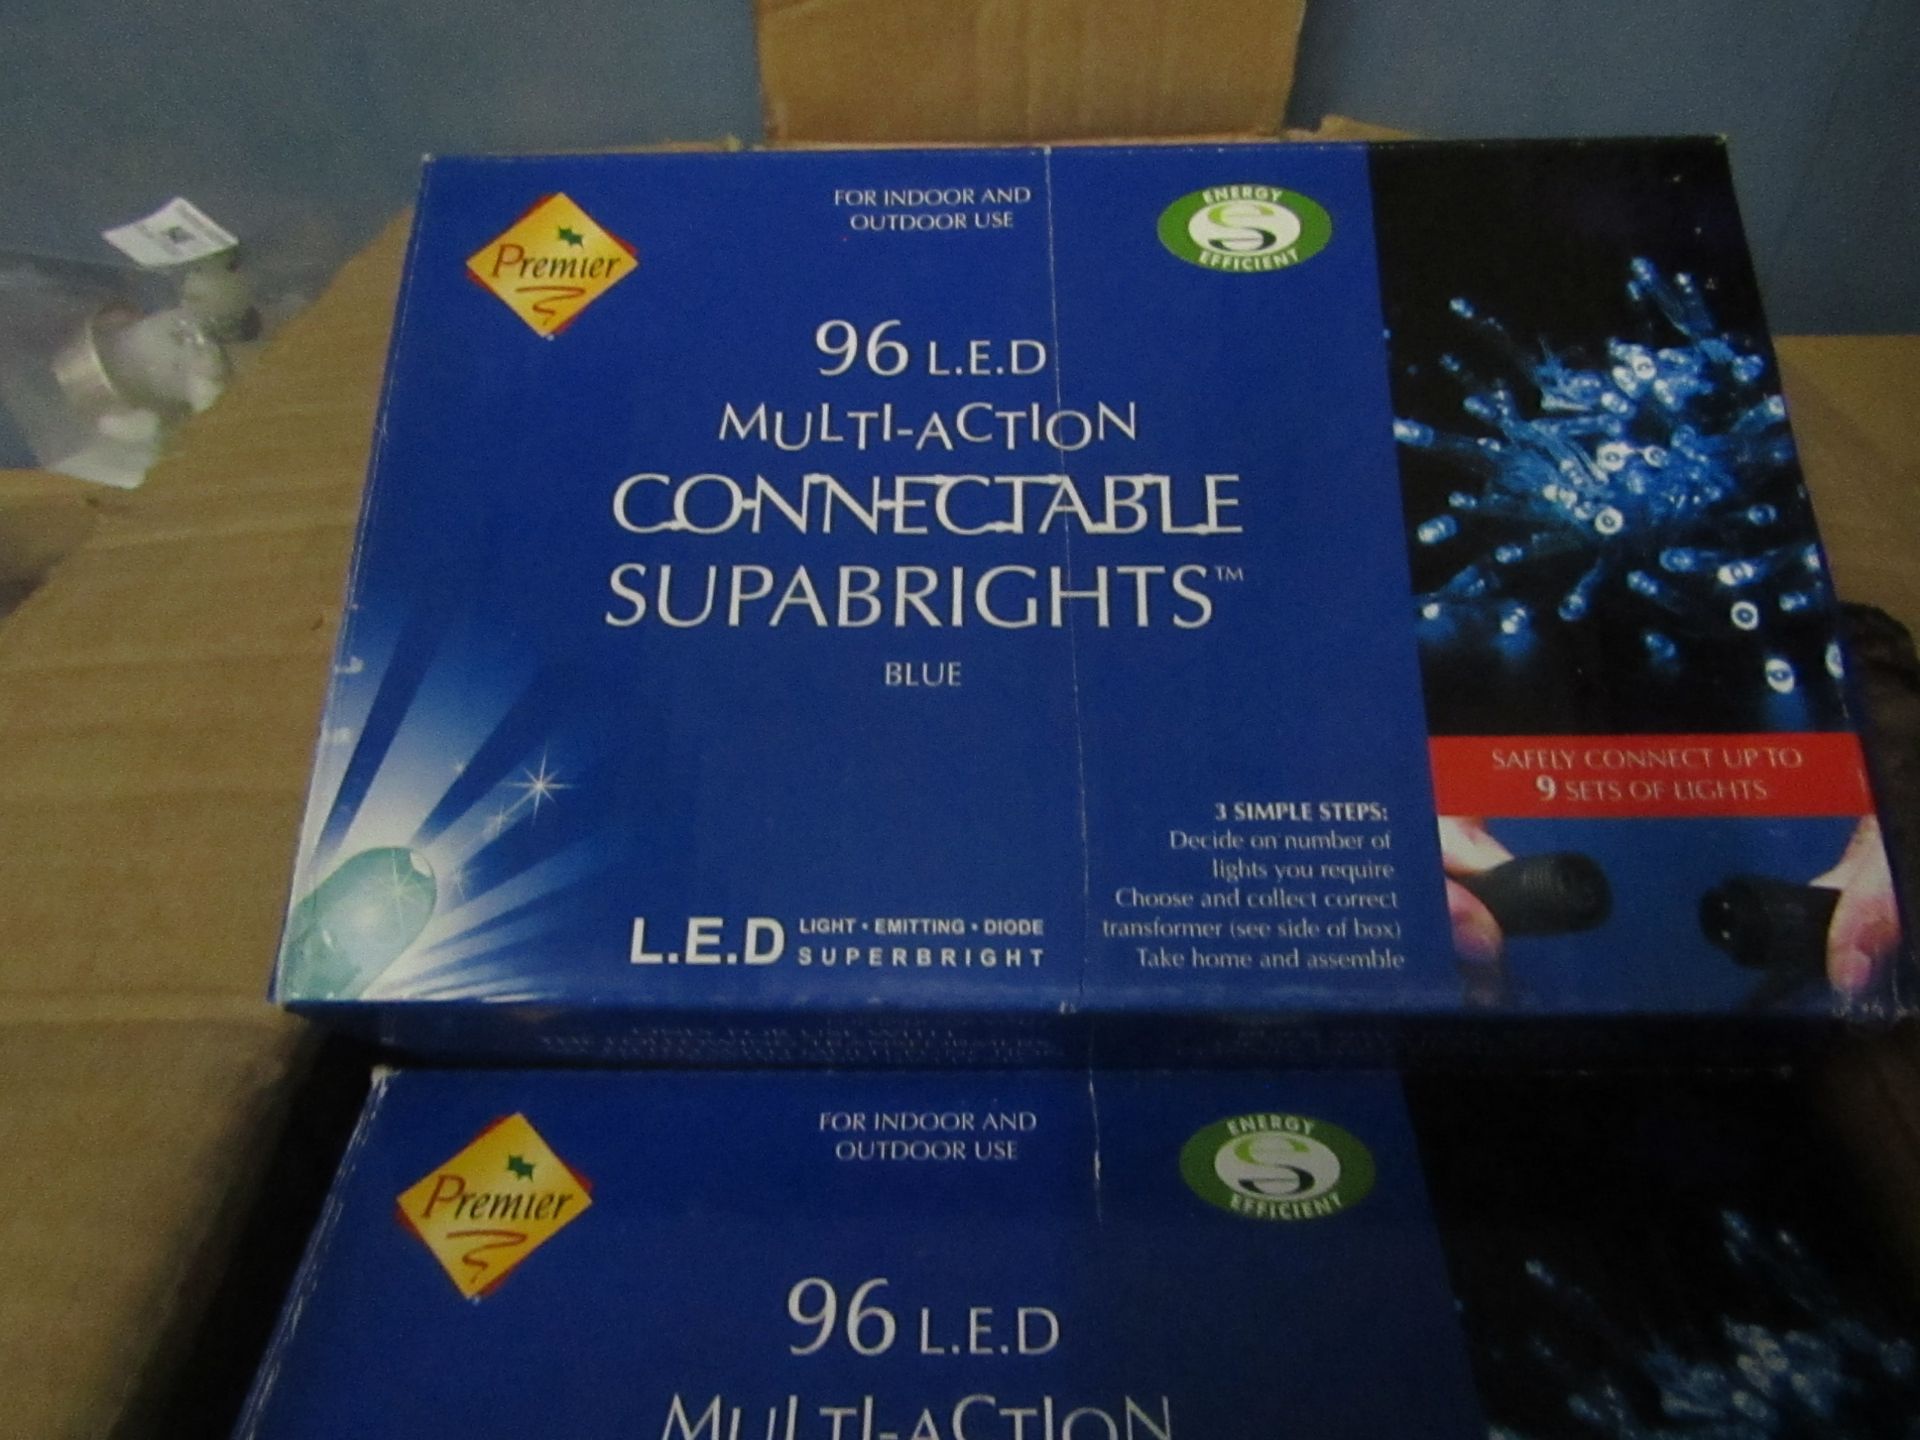 2 x Premier 96 LED Multi Action Connectable Supabright Lights in blue. Boxed but unchecked